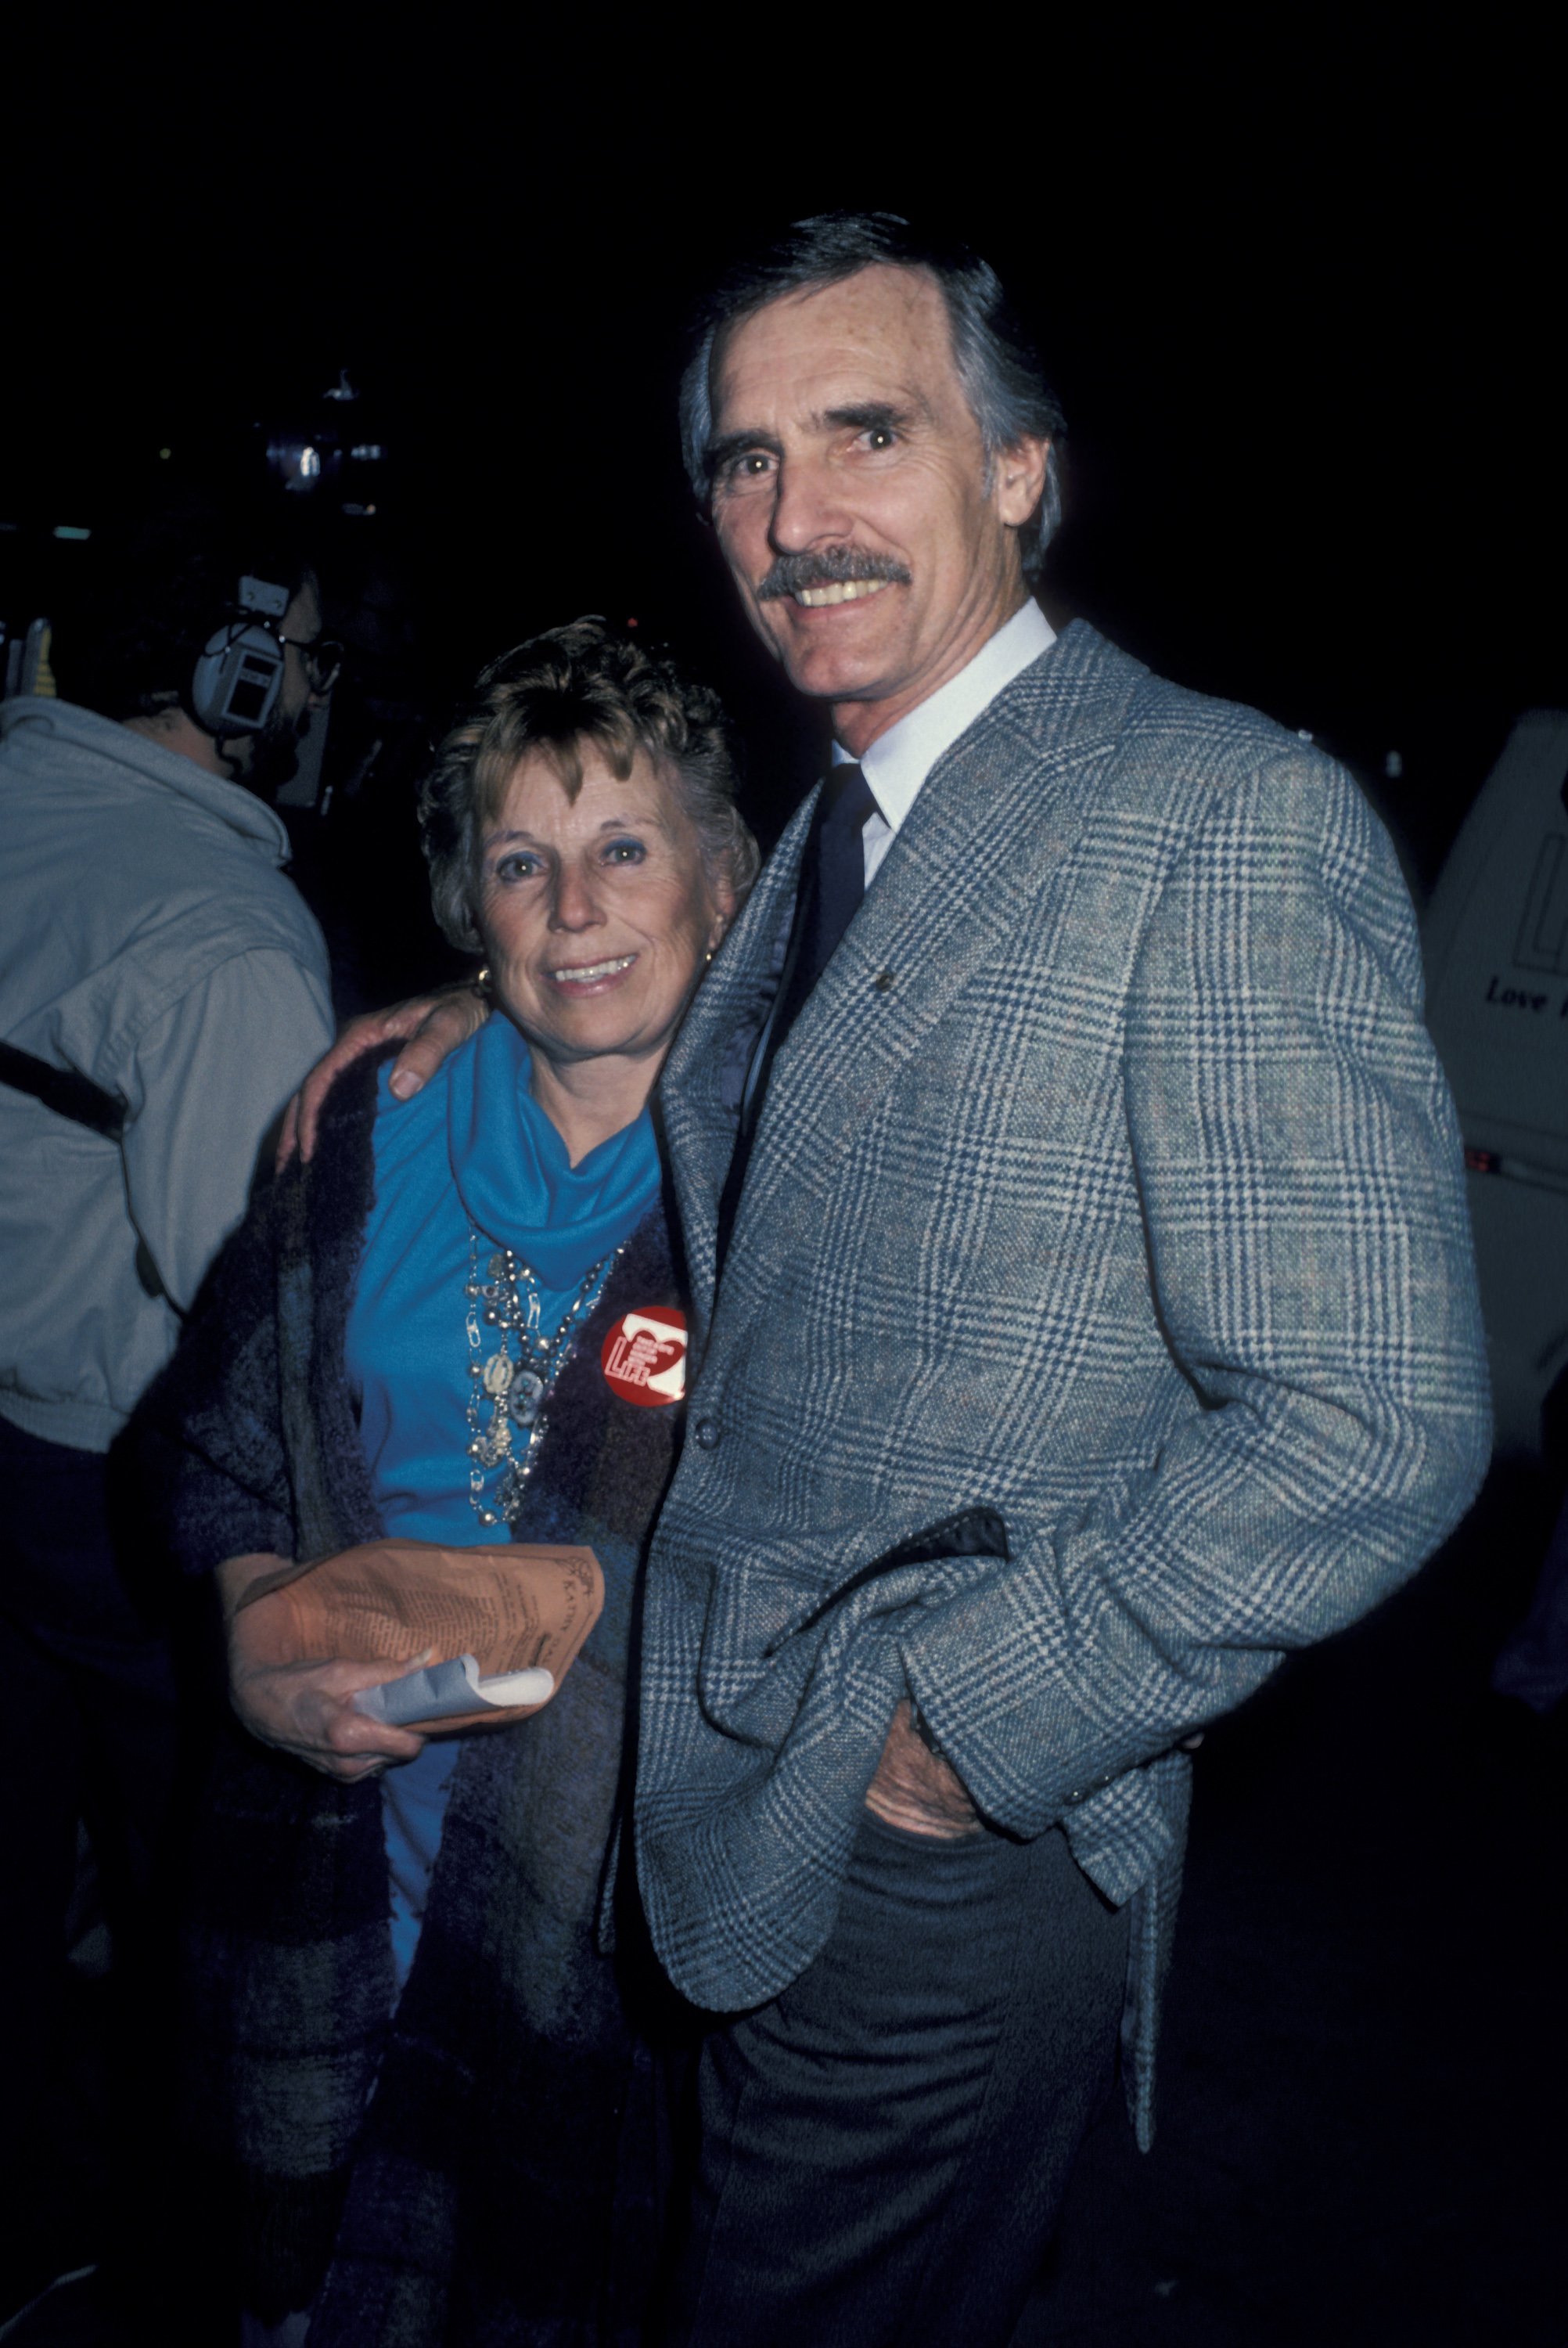 Dennis Weaver and Gerry Stowell during Fundraiser for L.I.F.E. at Gallagher's Restaurant on February 11, 1986 in Los Angeles, California. / Source: Getty Images